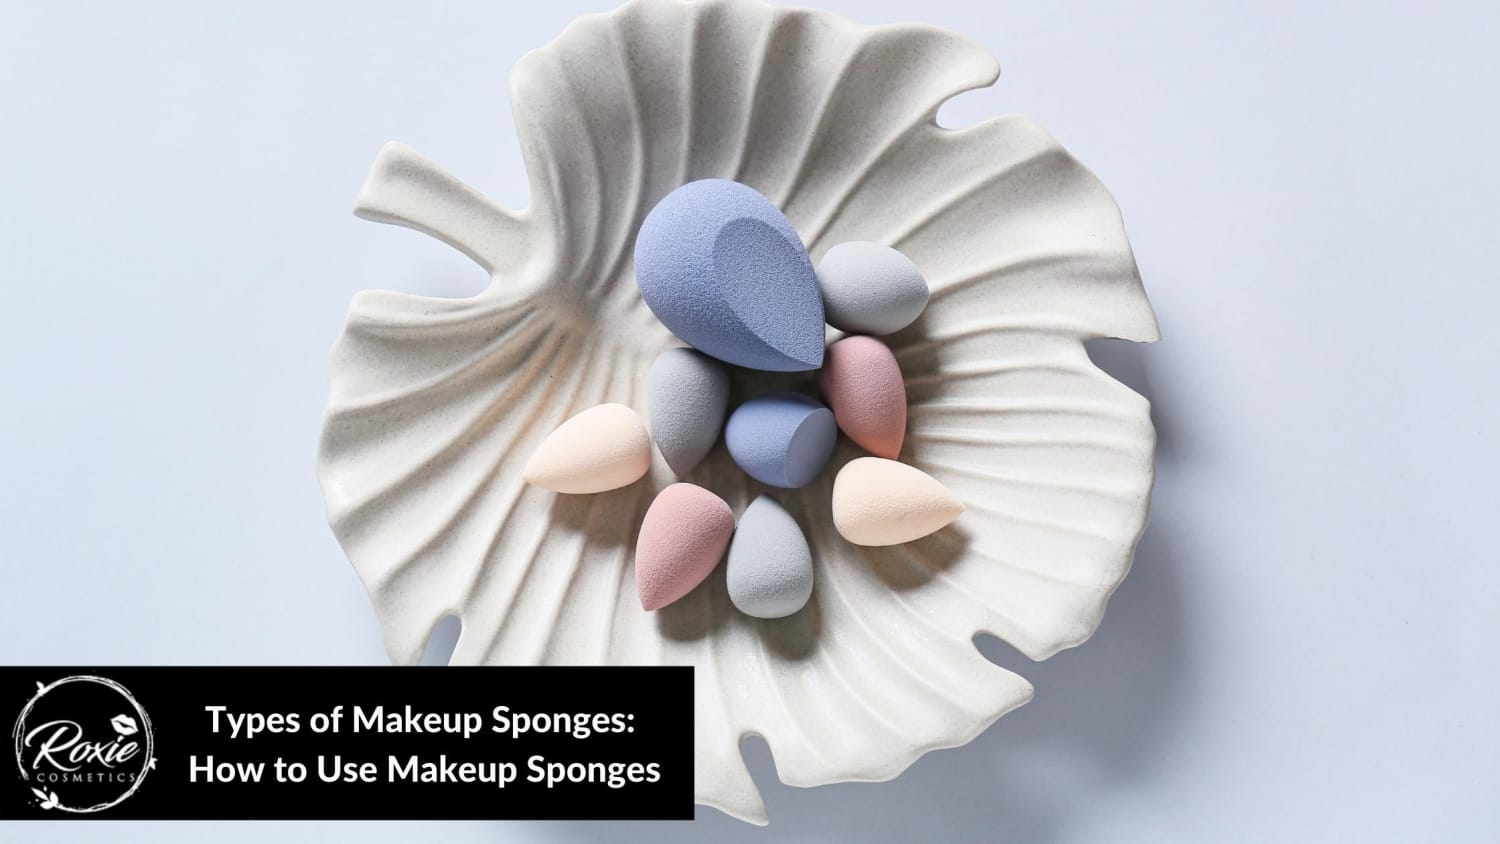 Types of Makeup Sponges: How to Use Makeup Sponges